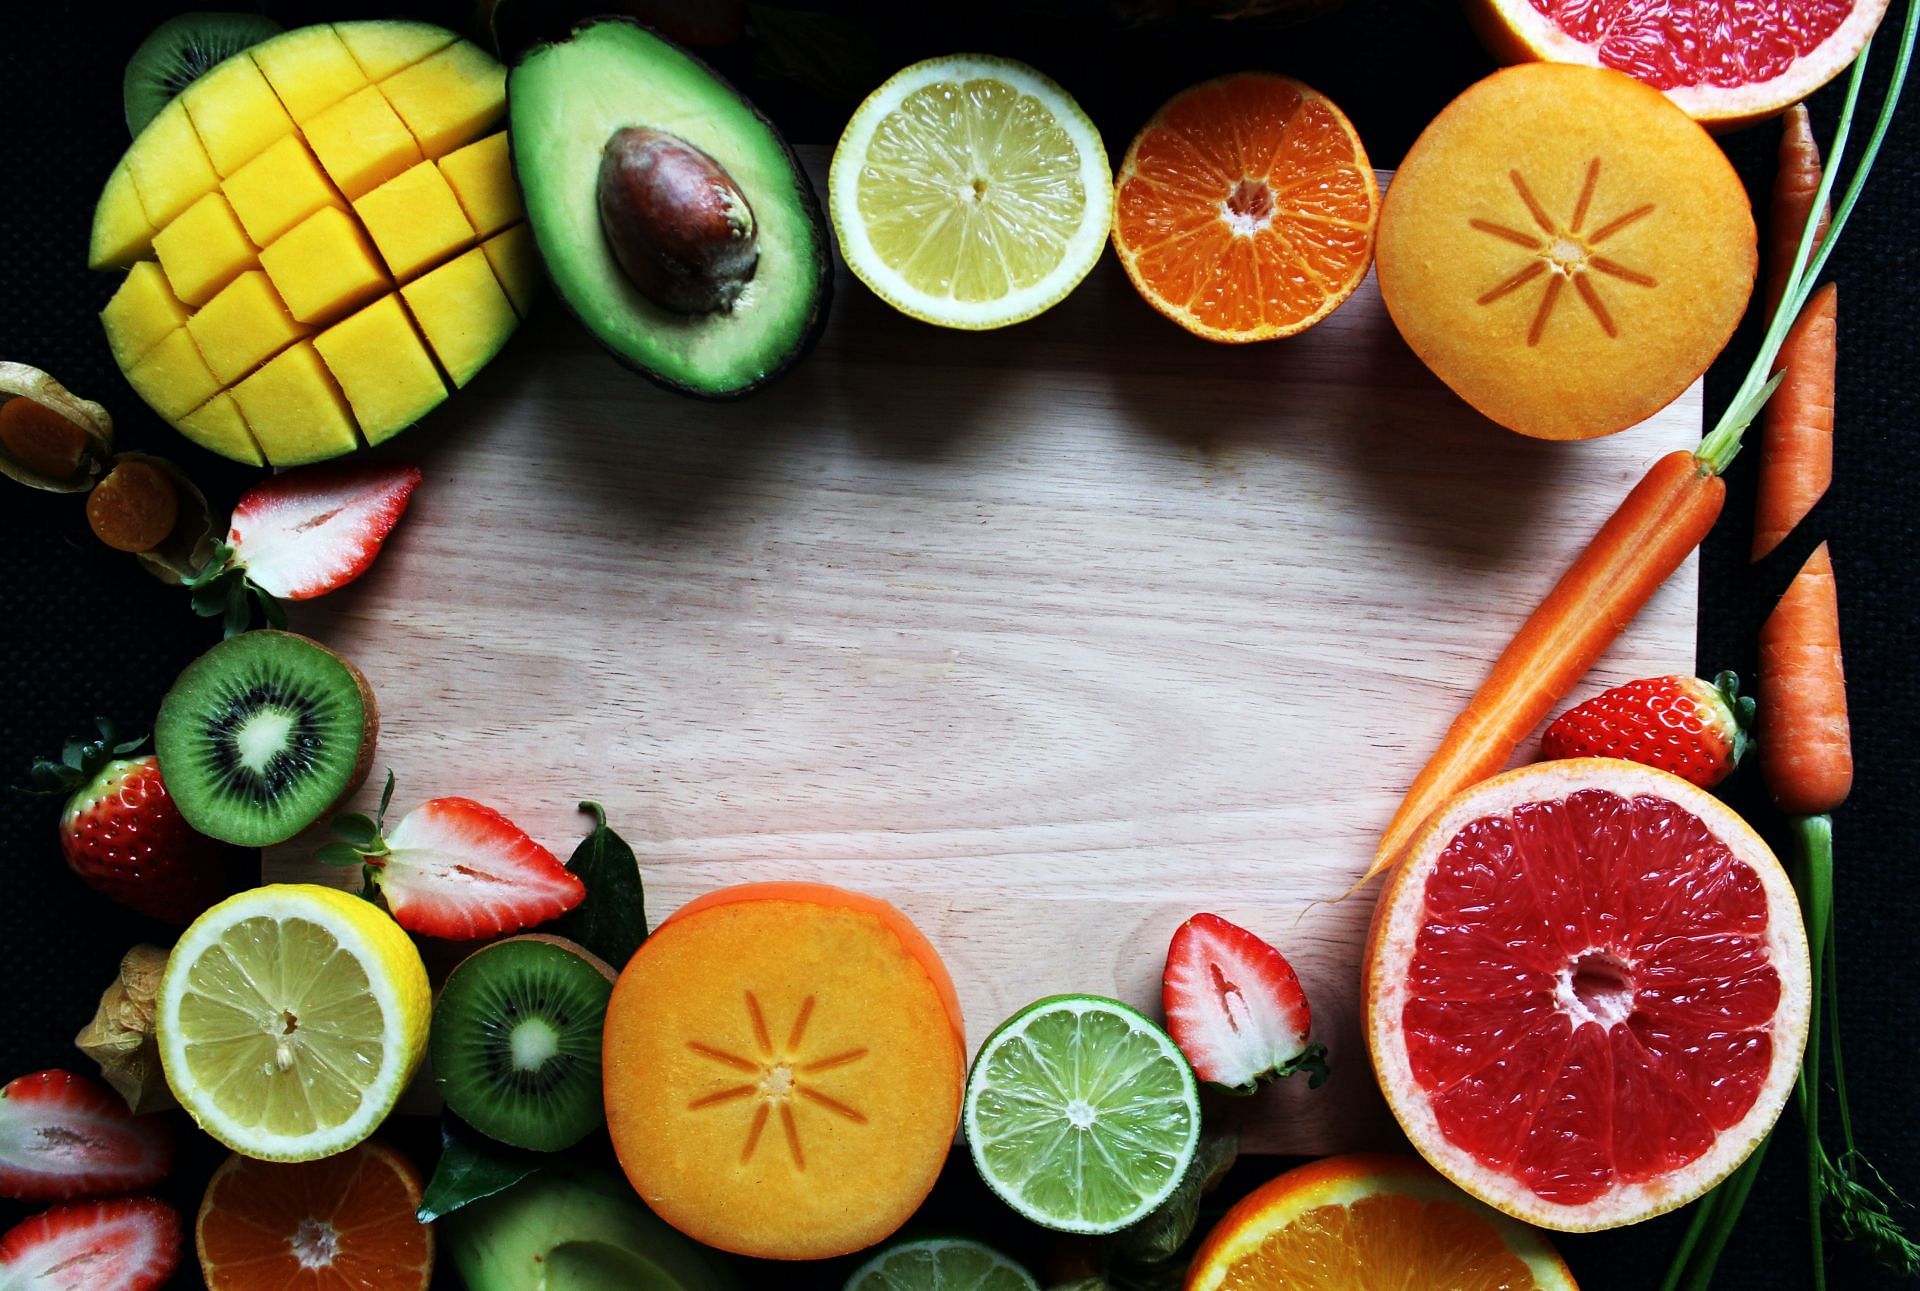 Summer fruits can help you stay hydrated (Image via Unsplash/Amoon Ra)